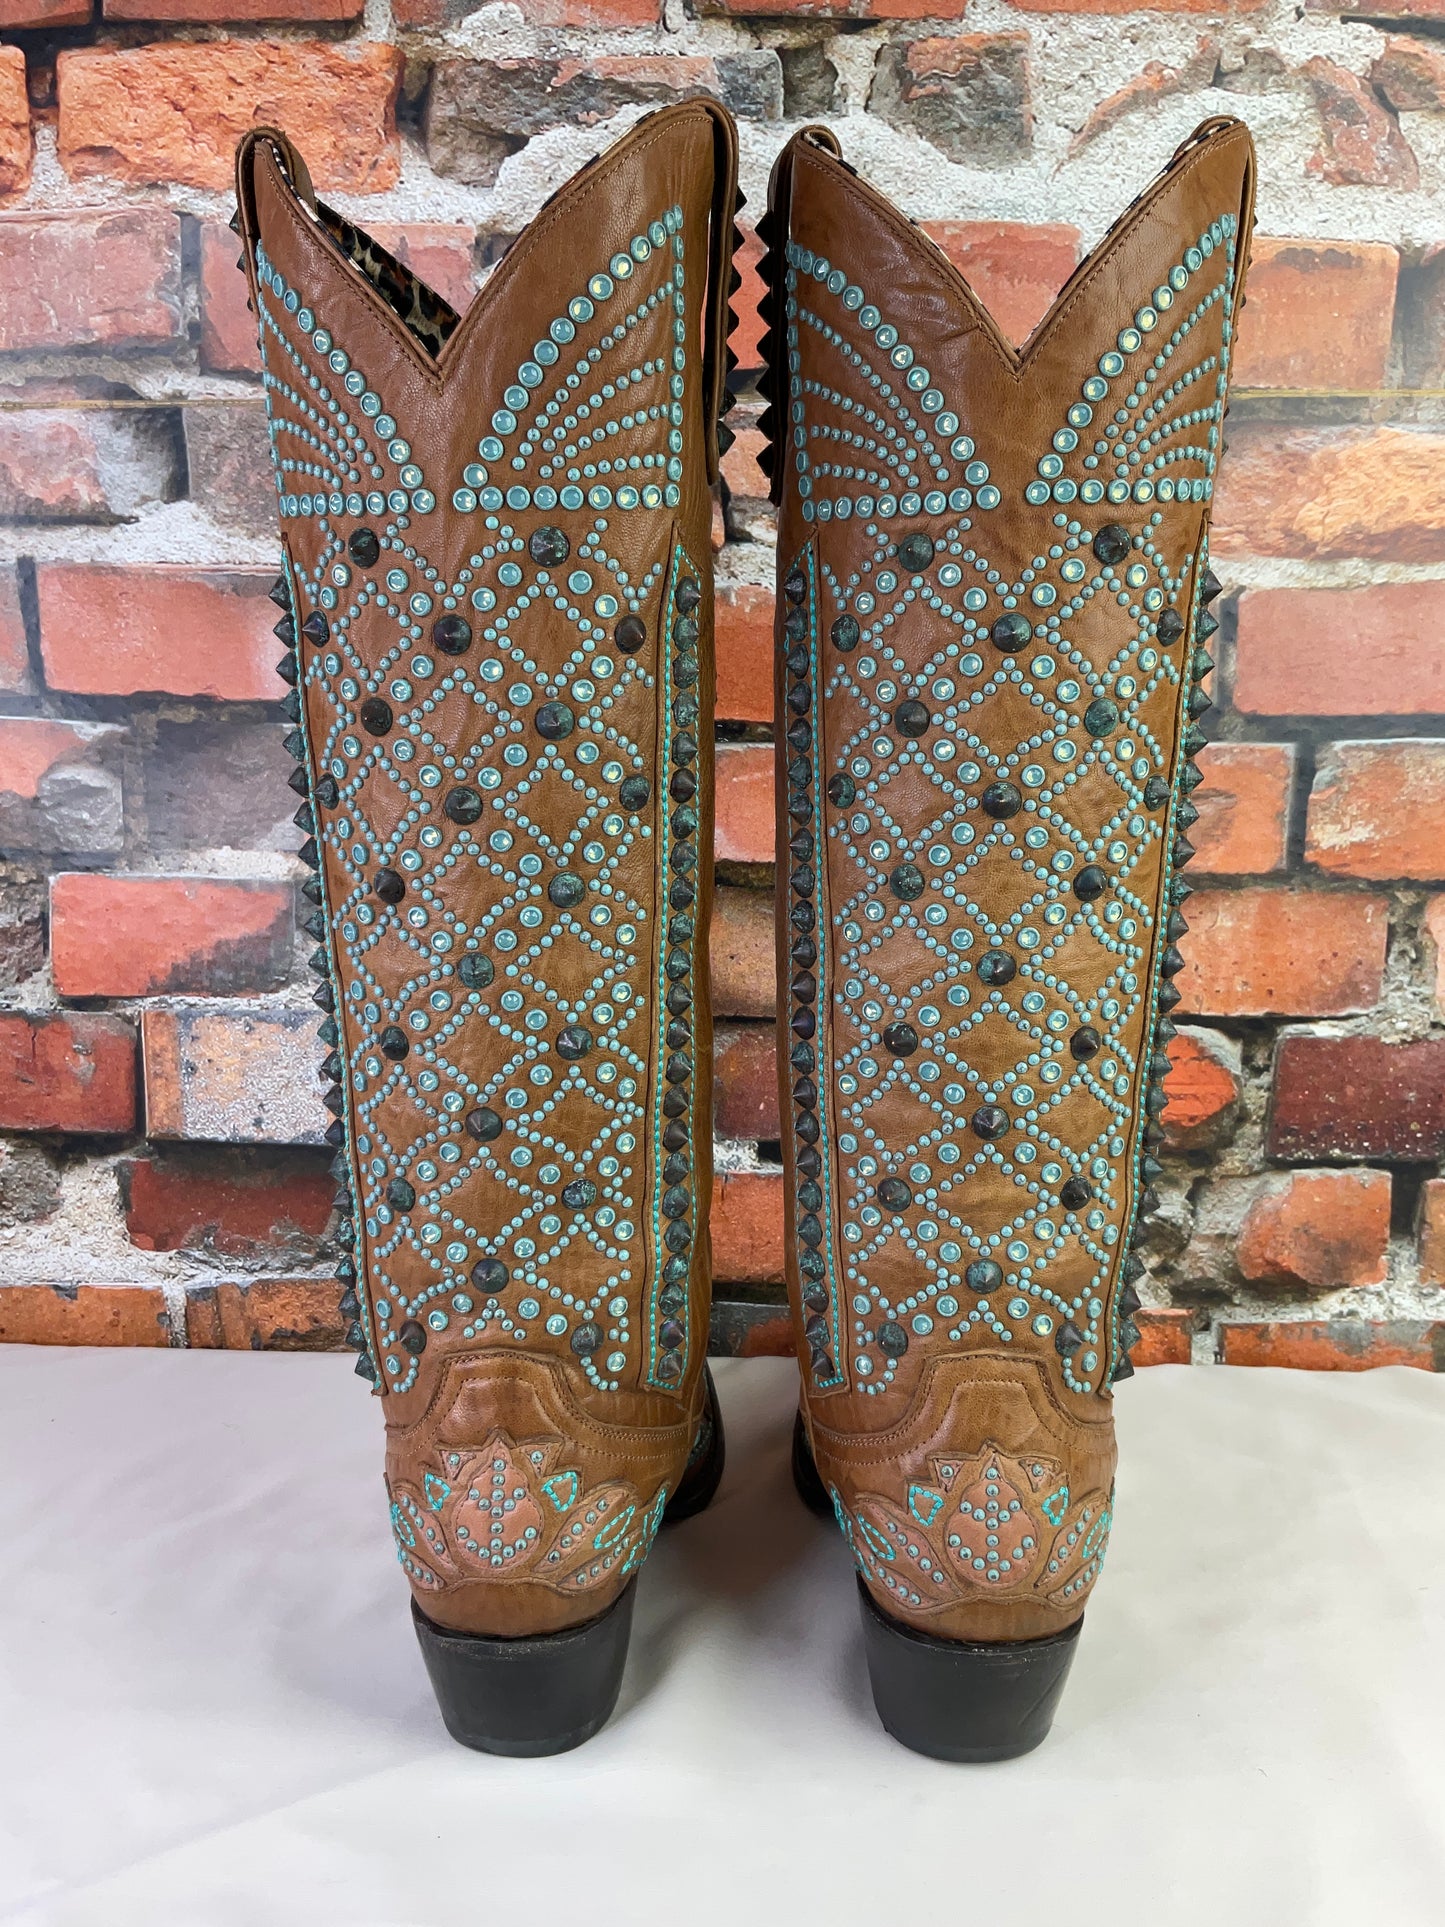 Victoria Spiked Cognac Boots